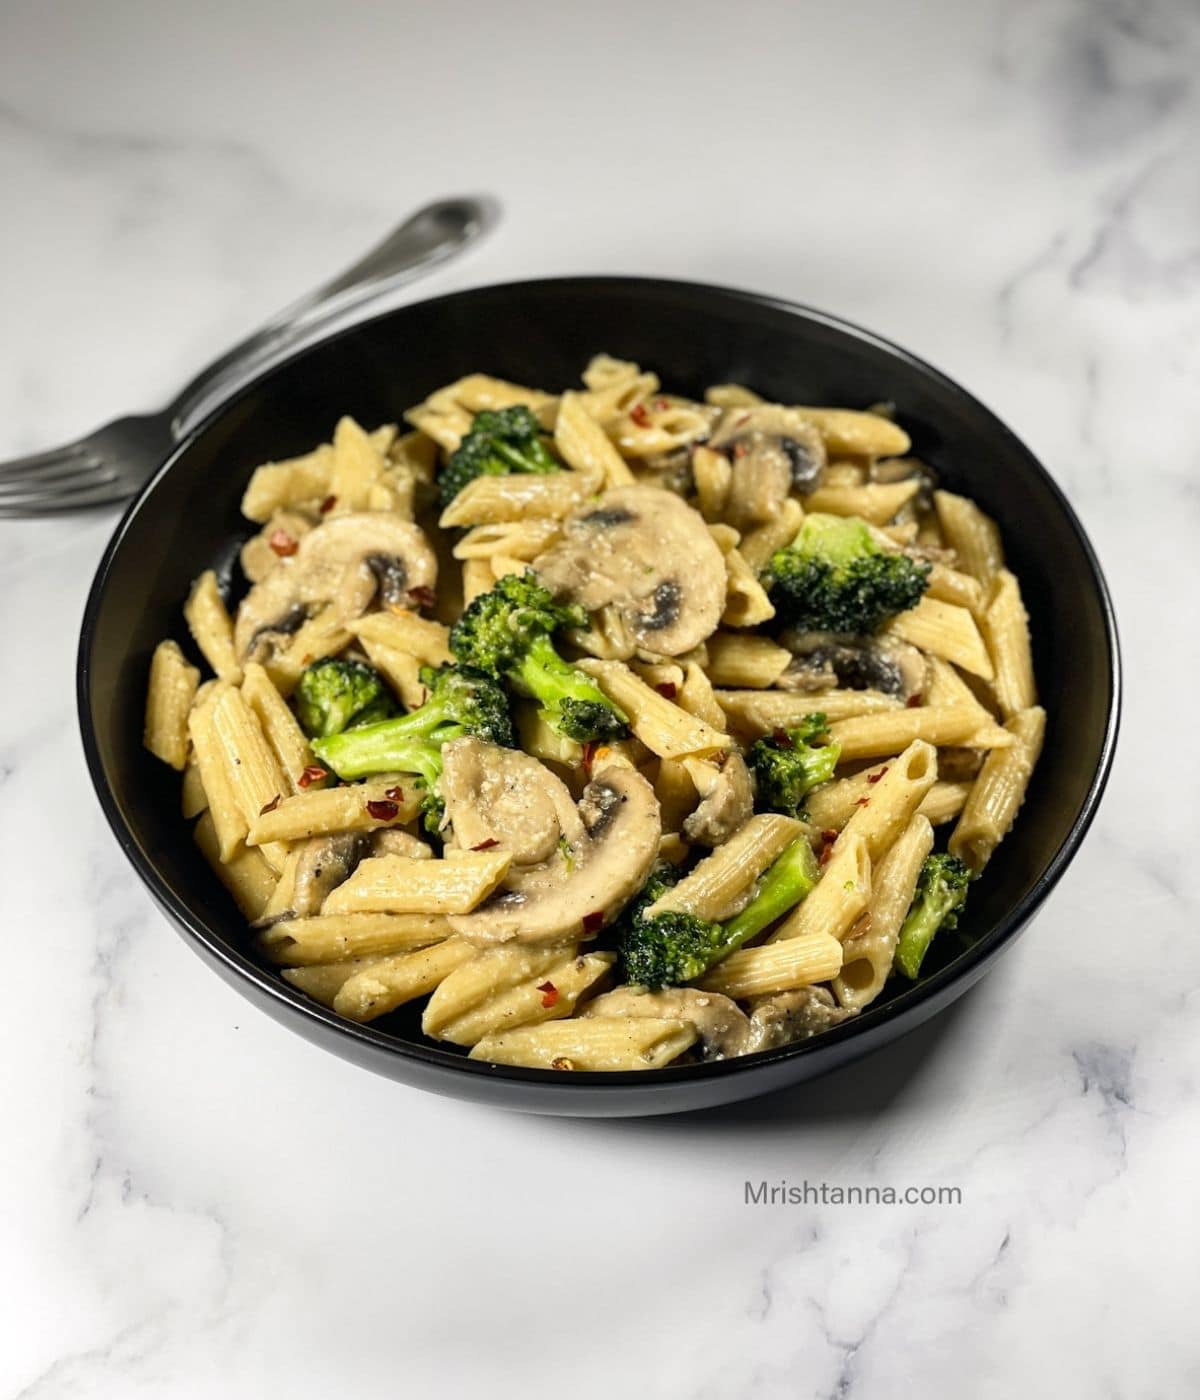 A bowl of vegan creamy mushroom pasta is on the table with a fork.